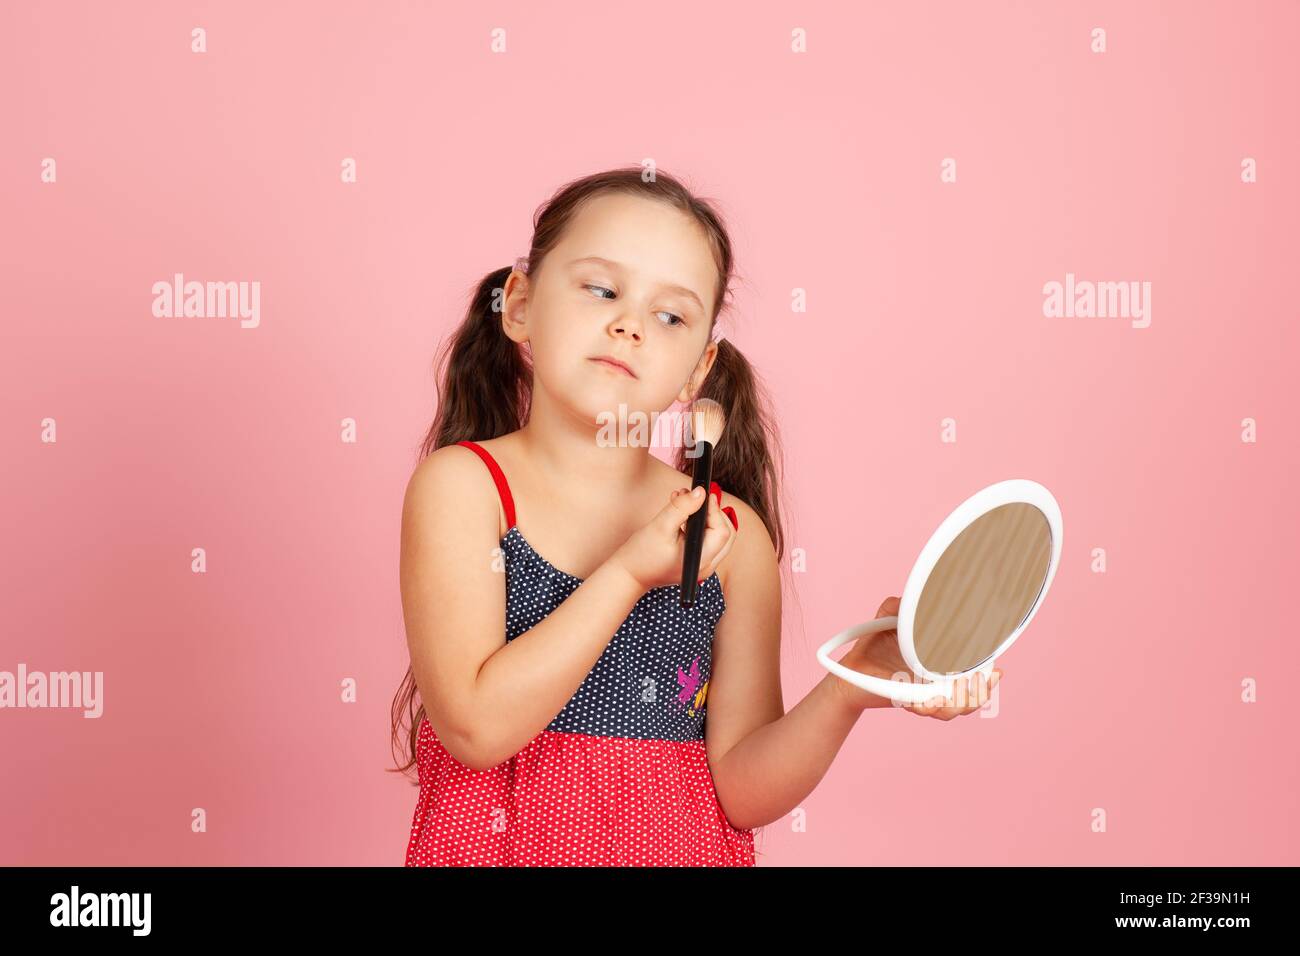 a European girl with ponytails and a dress, who powders her cheek with a brush, looks into a white plastic mirror, isolated on a pink background Stock Photo